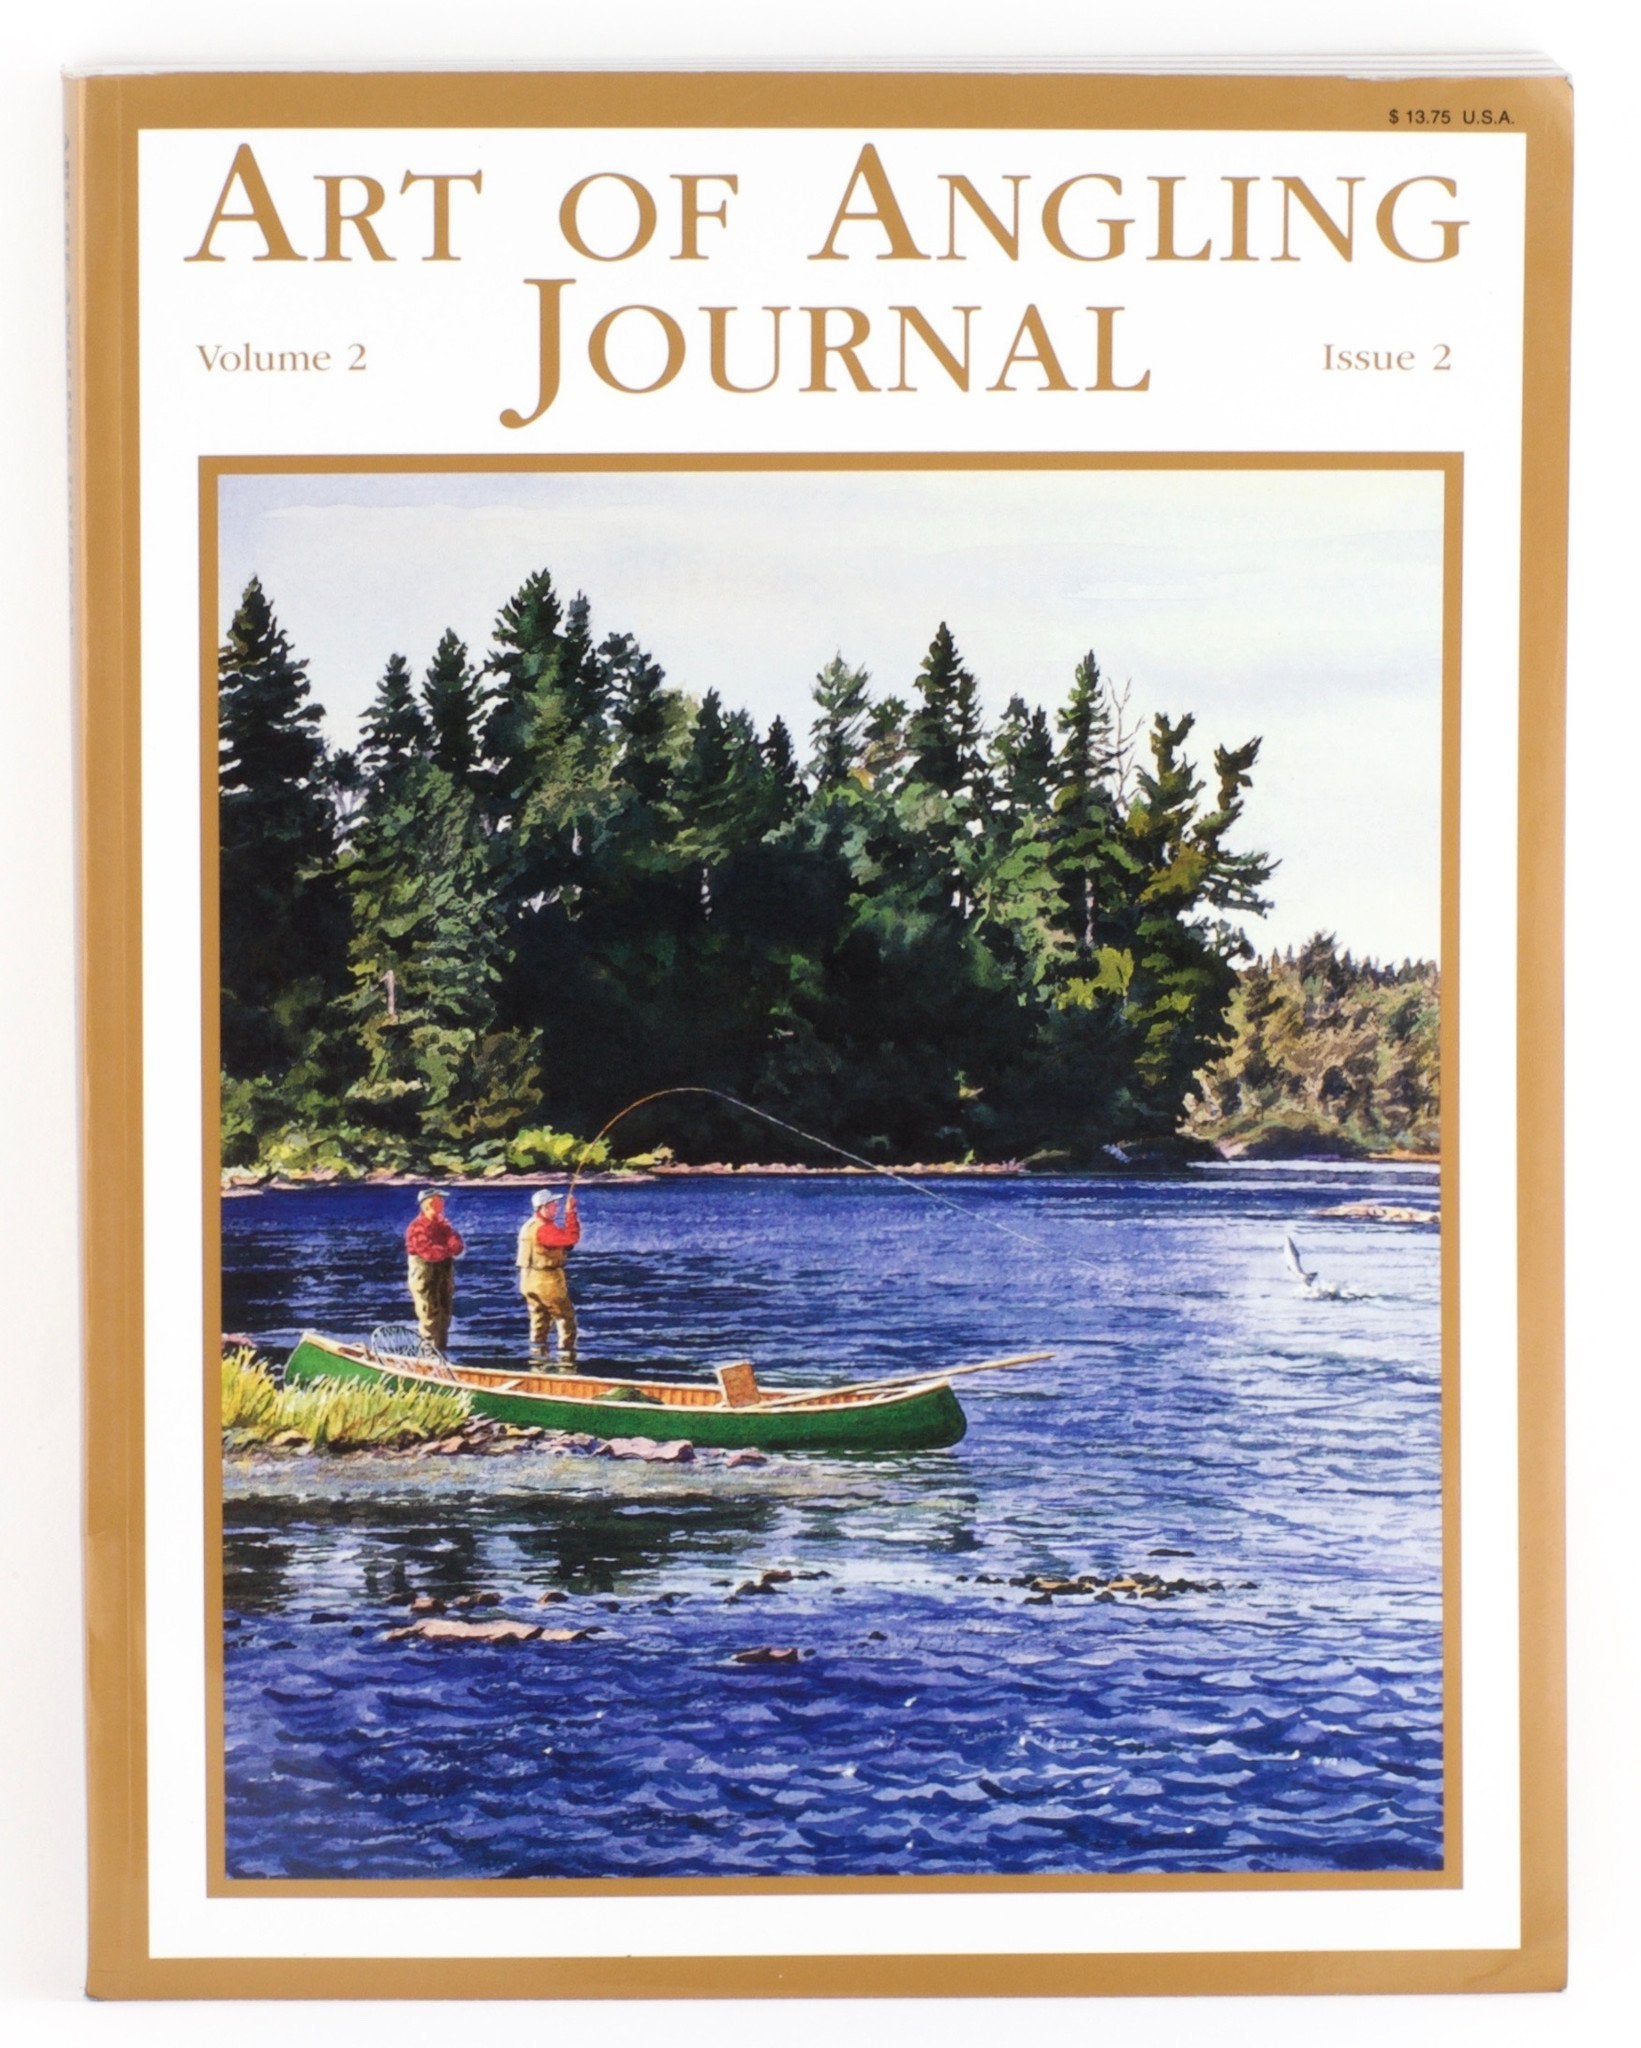 Art of Angling Journal - Volume 2 Issue 2 